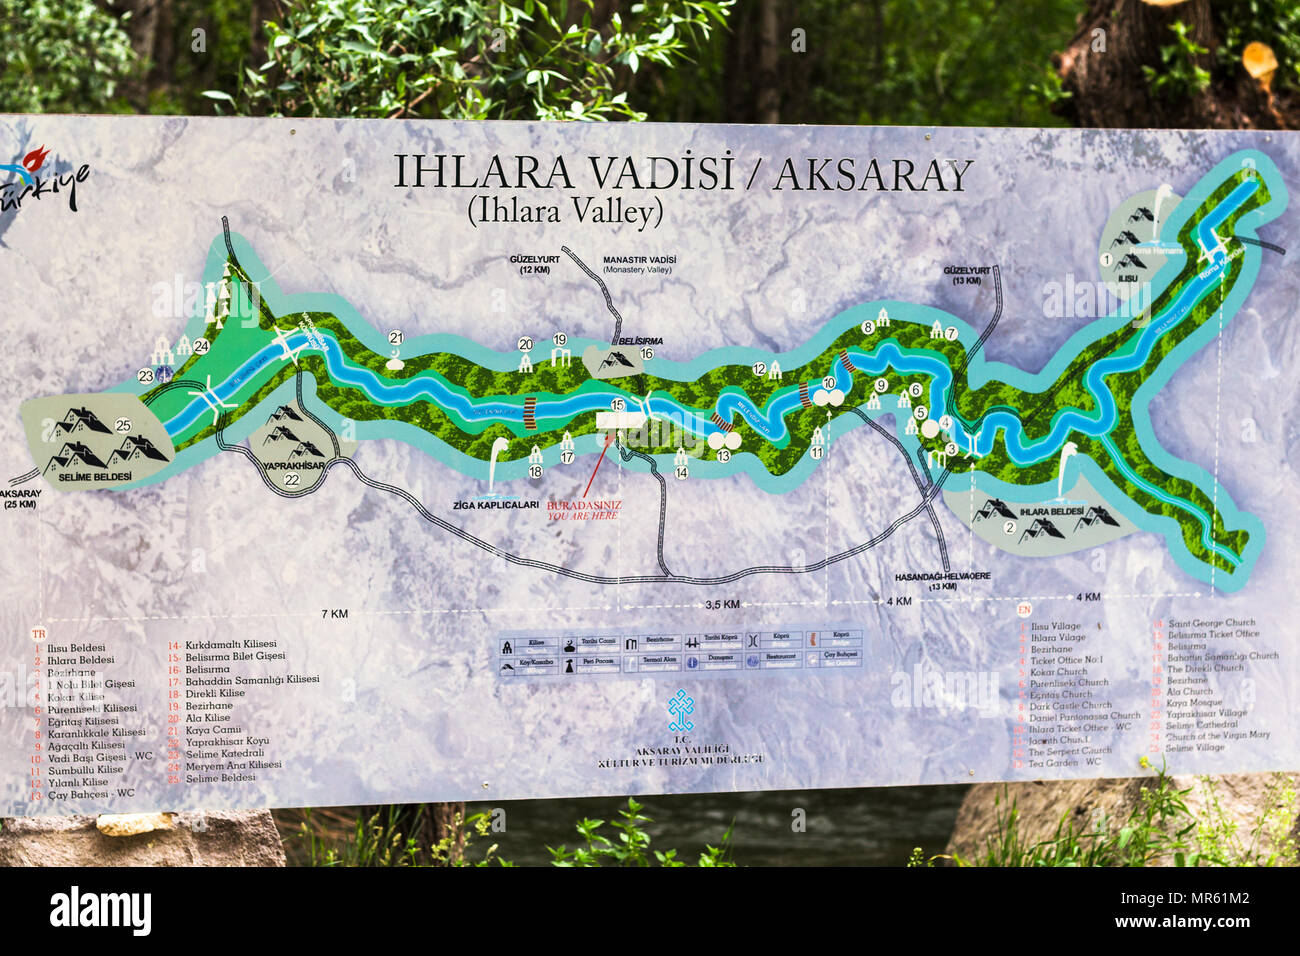 IHLARA VALLEY, TURKEY - MAY 6, 2018: outdoor map of Ihlara Valley in gorge in Aksaray Province. Ihlara Valley is 16 km long gorge, it is the most famo Stock Photo